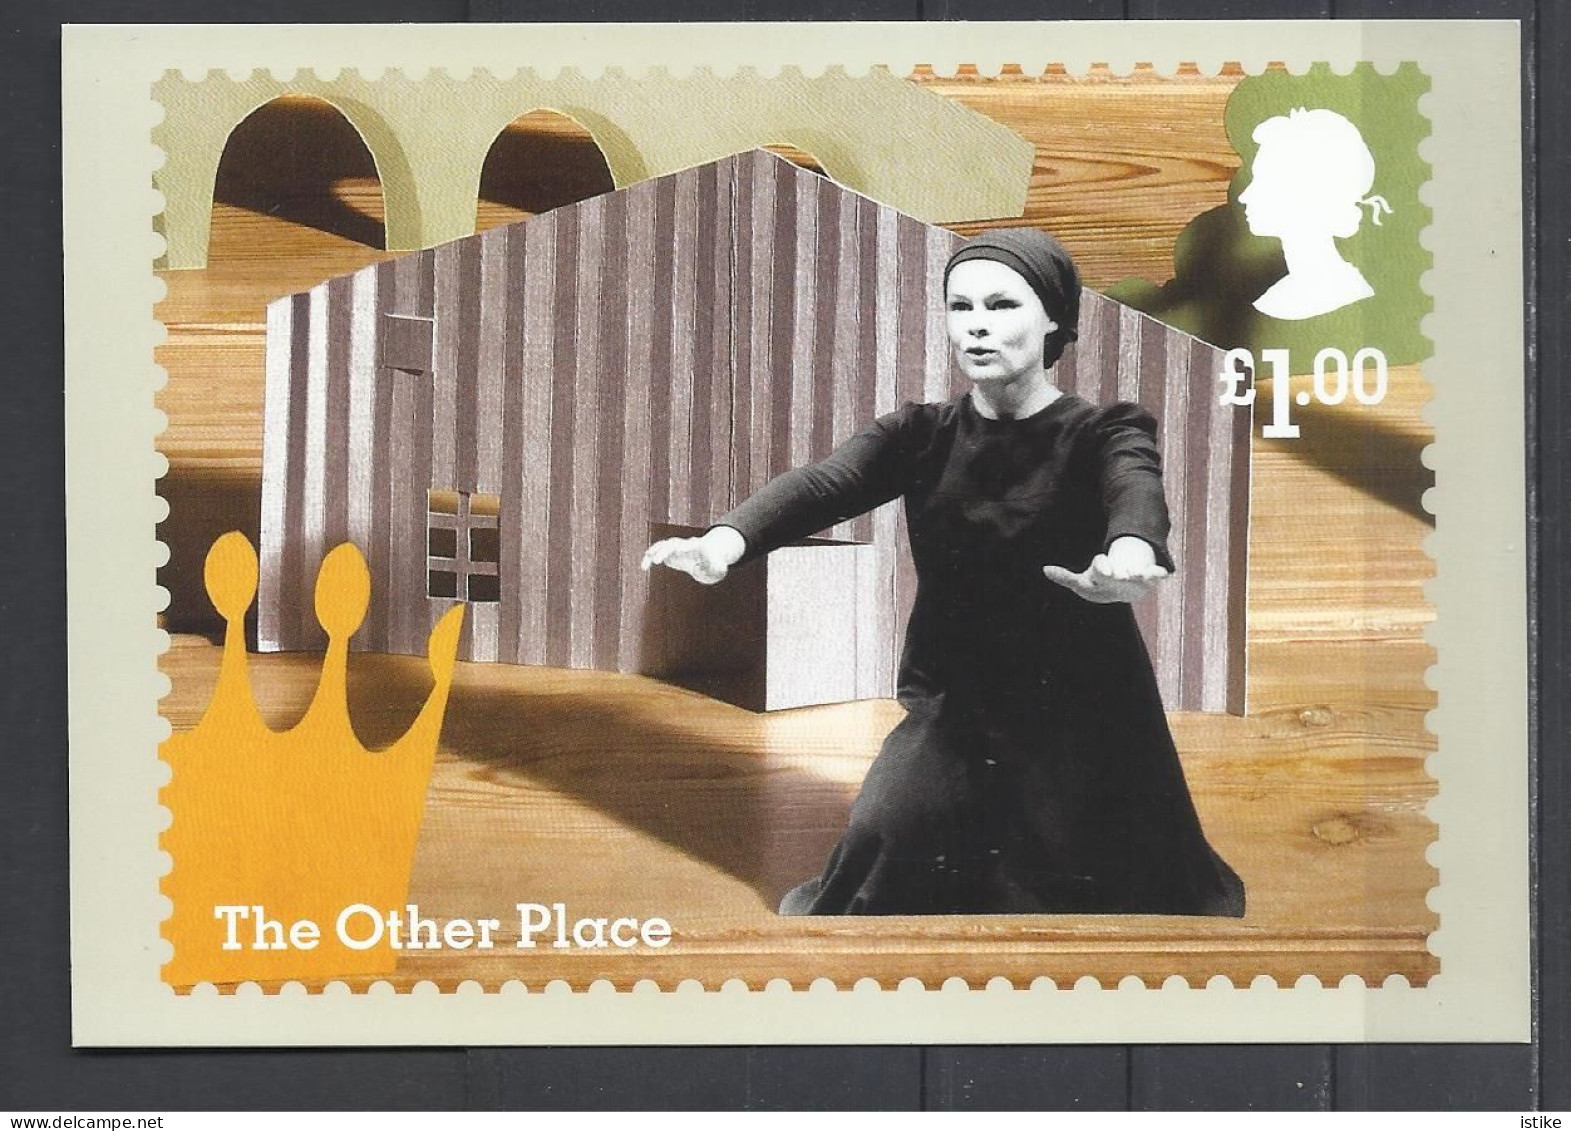 U.K., Royal Shakespeare Company, (The Other Place), Macbeth-Judi Dench. 2011. - Stamps (pictures)